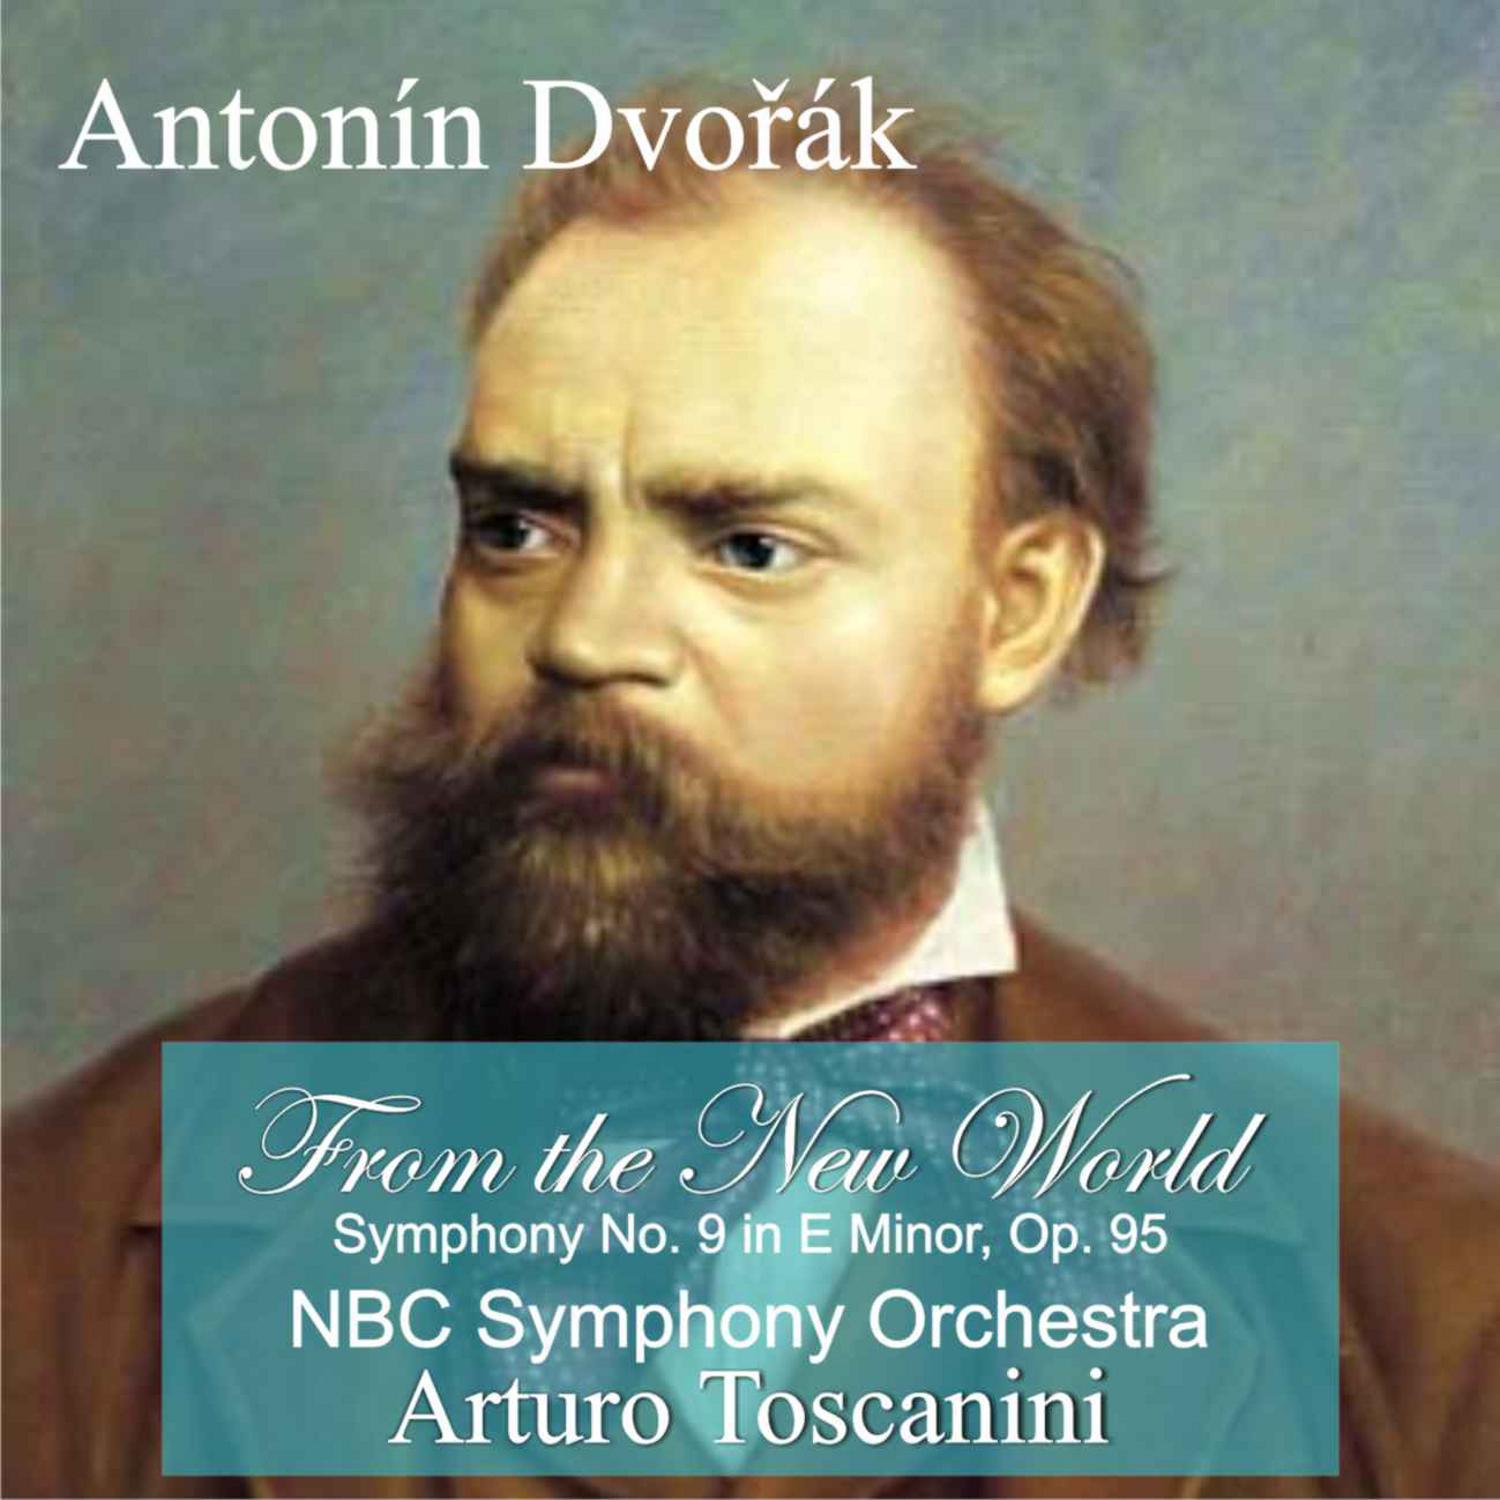 A. Dvořák: "From the New World" Symphony No. 9 in E Minor, Op. 95